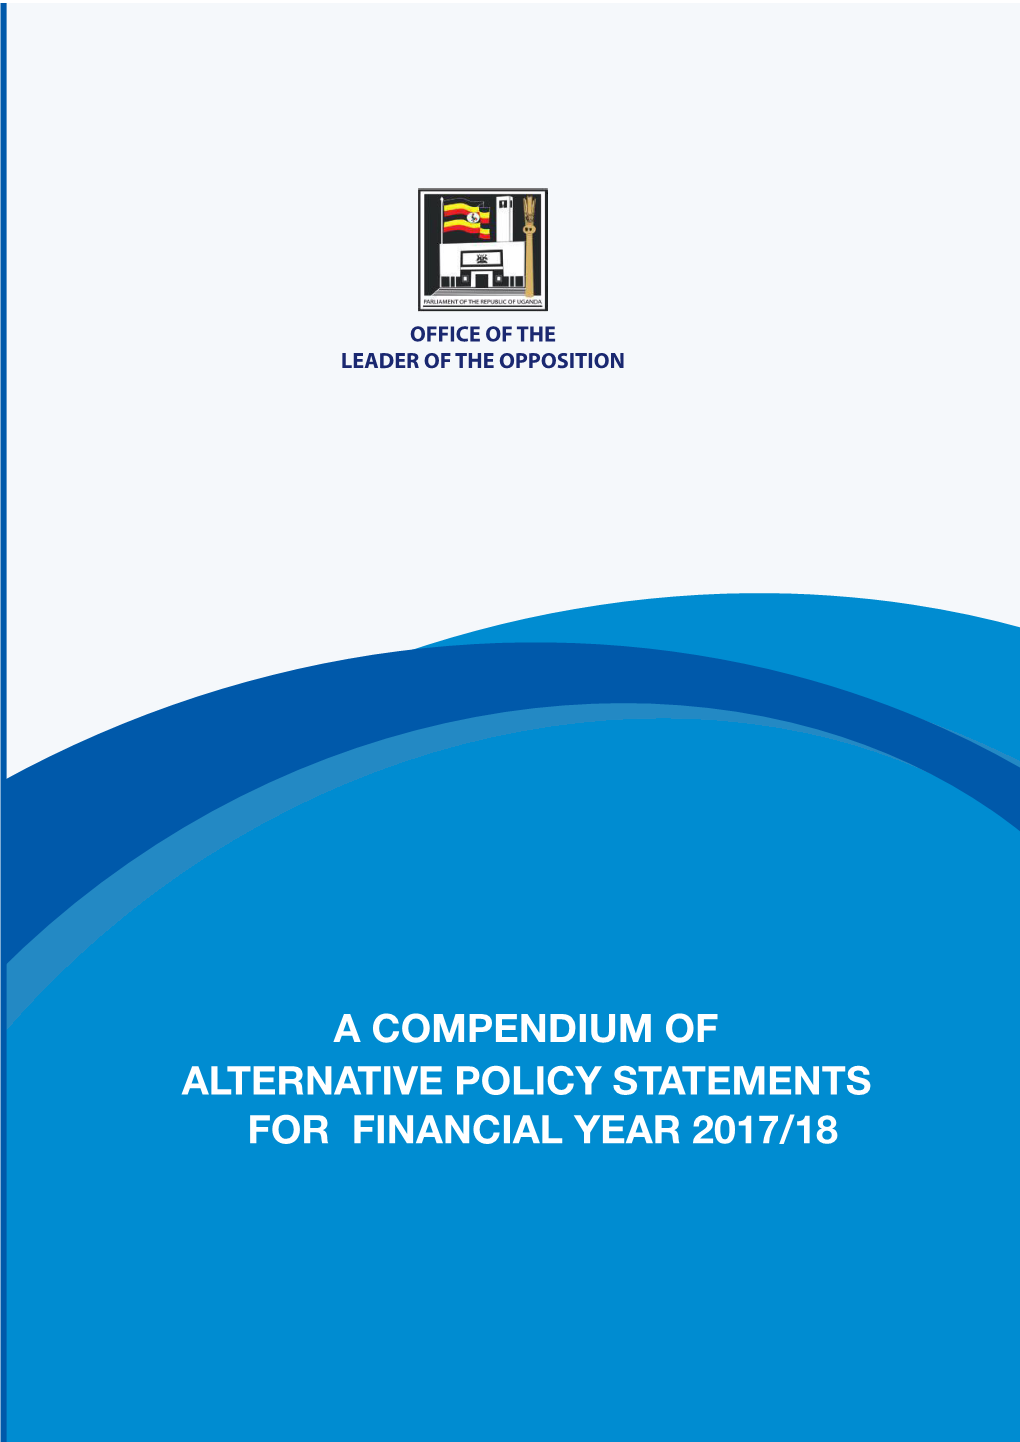 A COMPENDIUM of ALTERNATIVE POLICY STATEMENTS for FINANCIAL YEAR 2017/18 Foreword